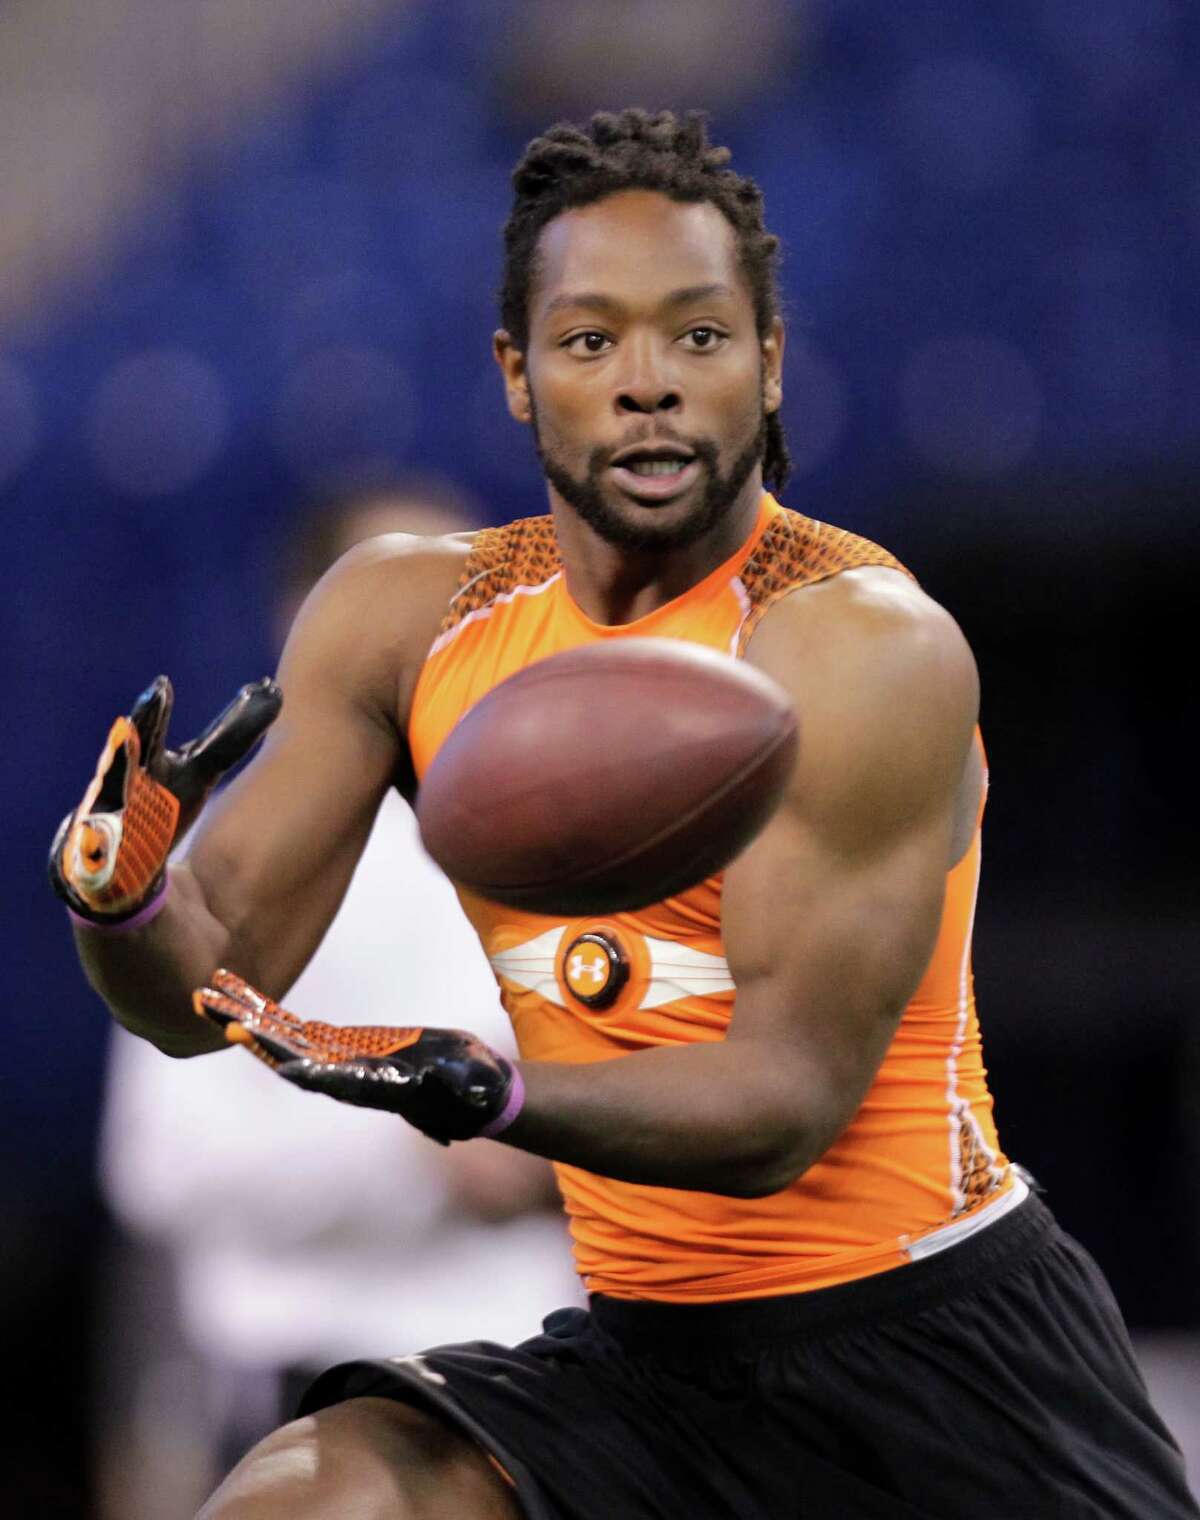 Michigan State receiver Keshawn Martin makes a catch as he runs a drill at the NFL football scouting combine in Indianapolis, Sunday, Feb. 26, 2012. (AP Photo/Michael Conroy)